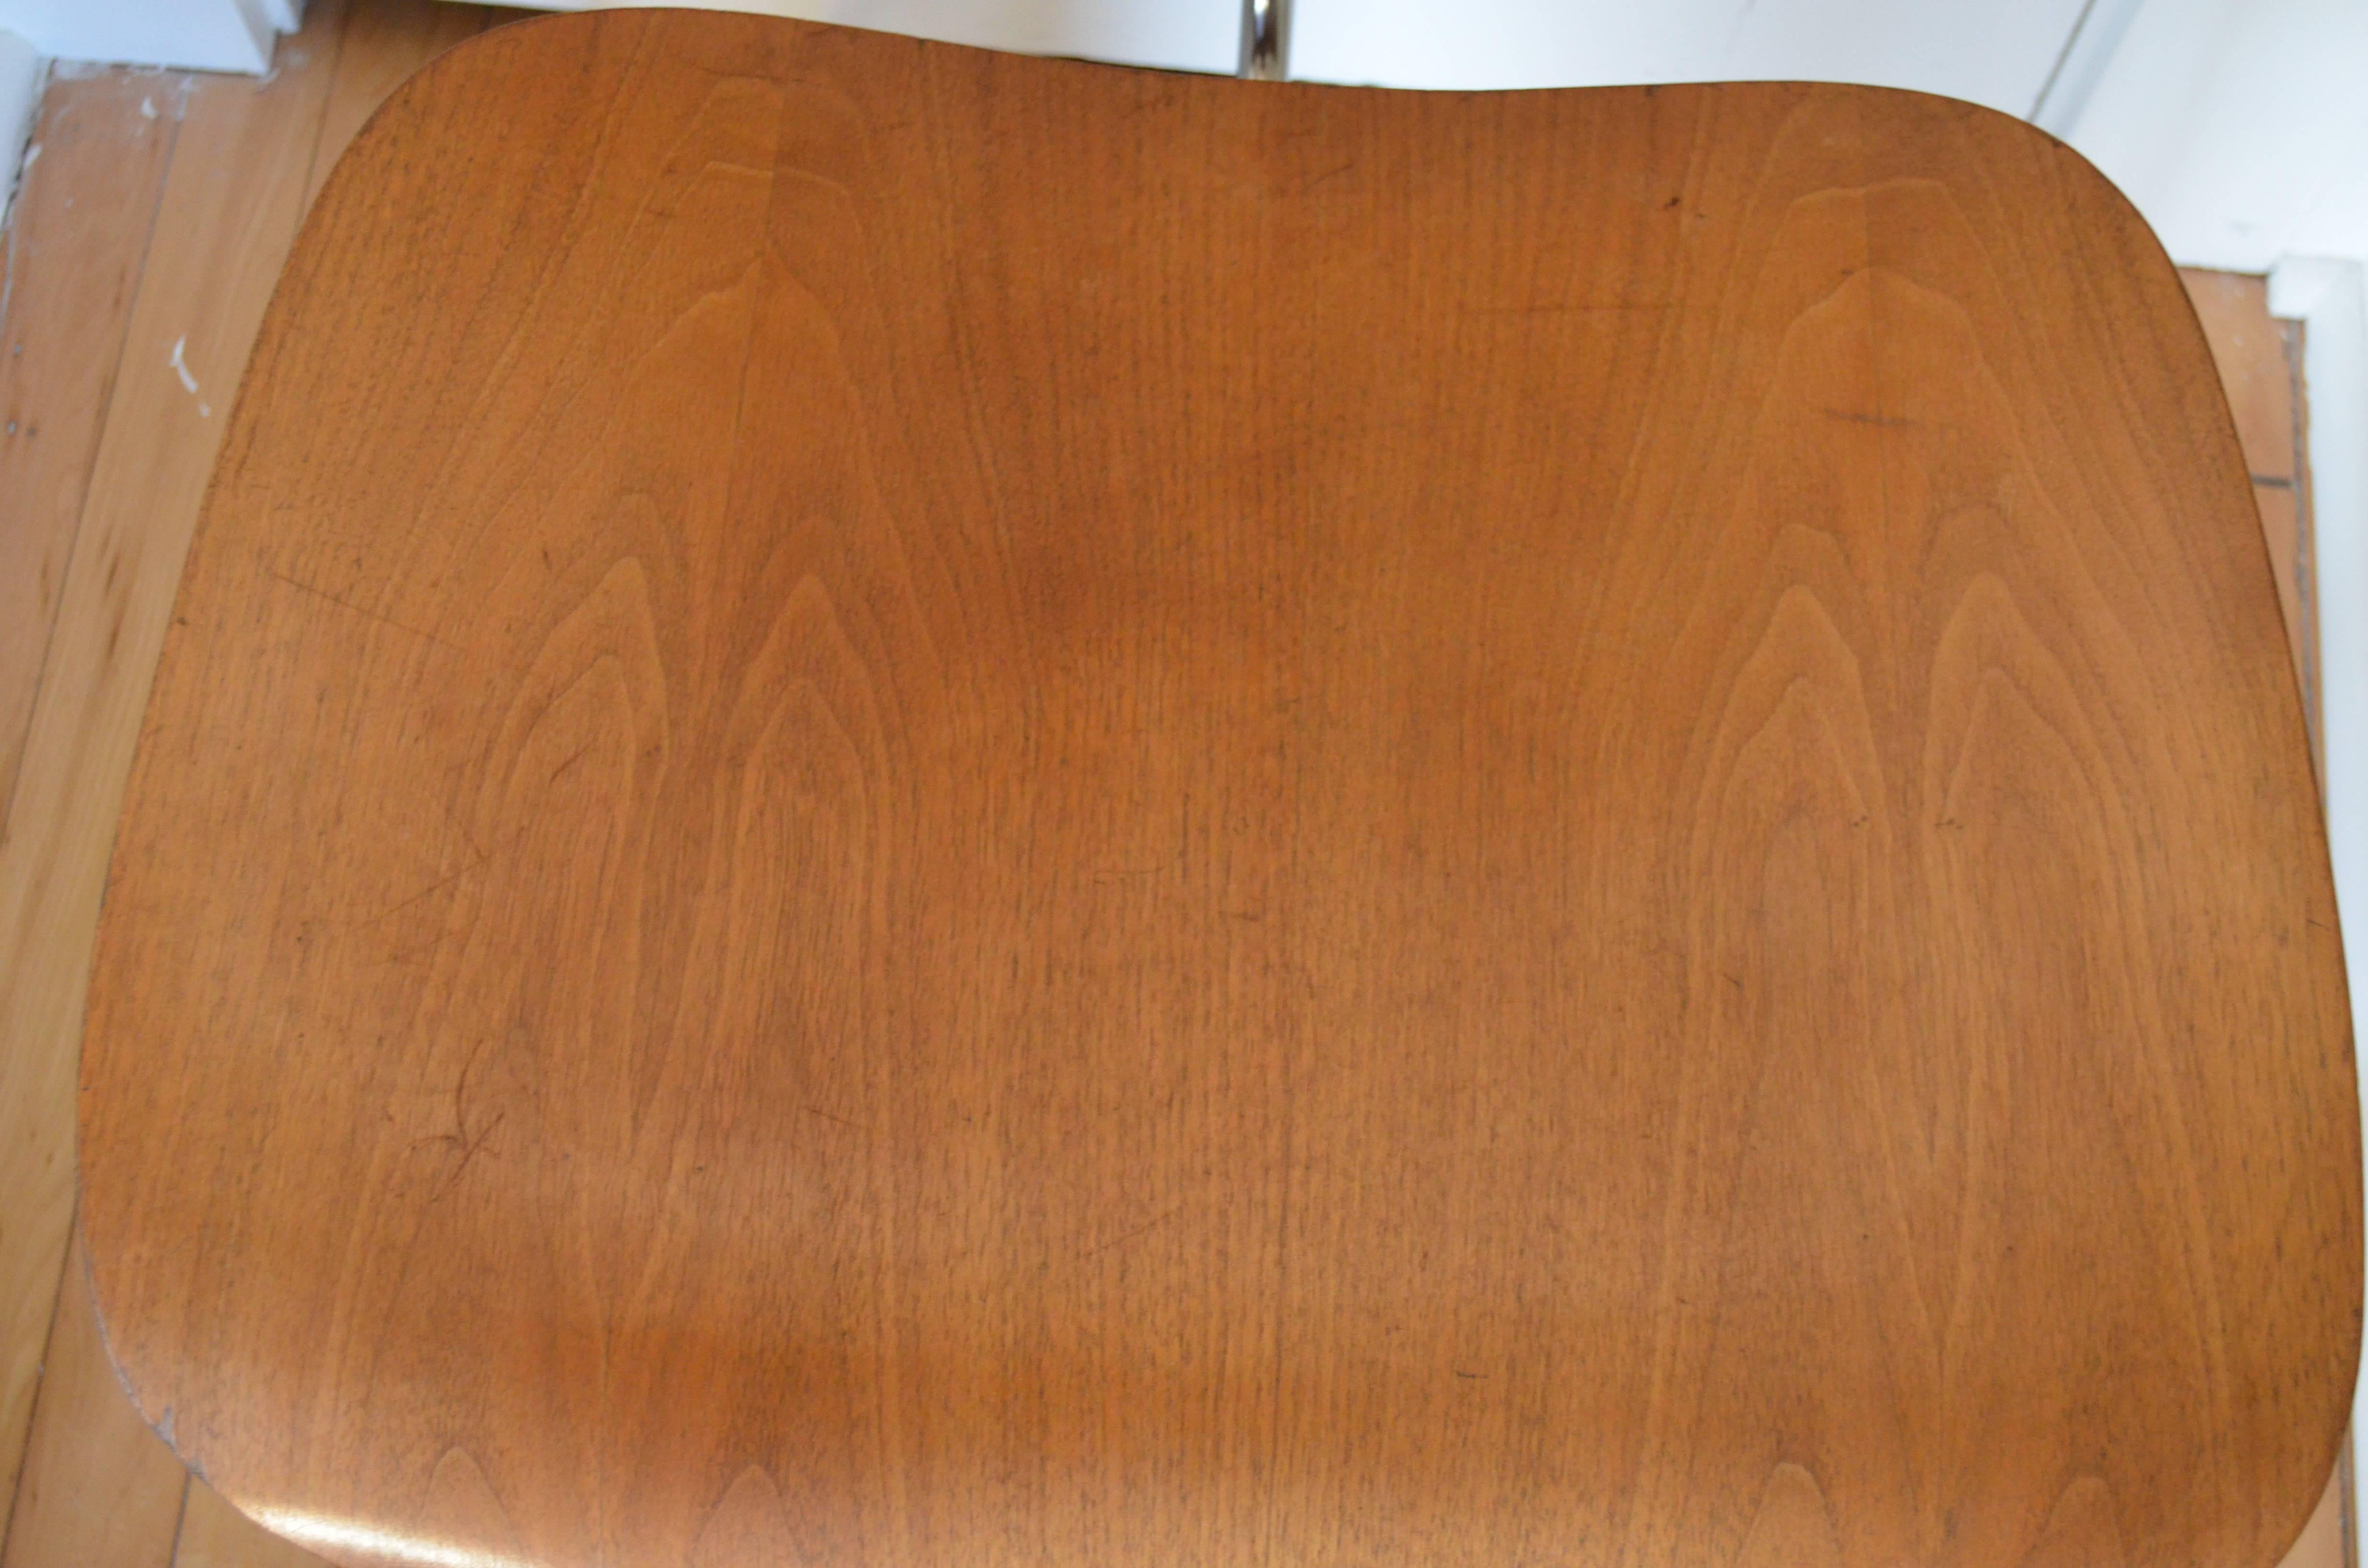 Herman Miller 1950s Walnut Dining Room Chair Chairs w/new HM Frames; Qty avail 2